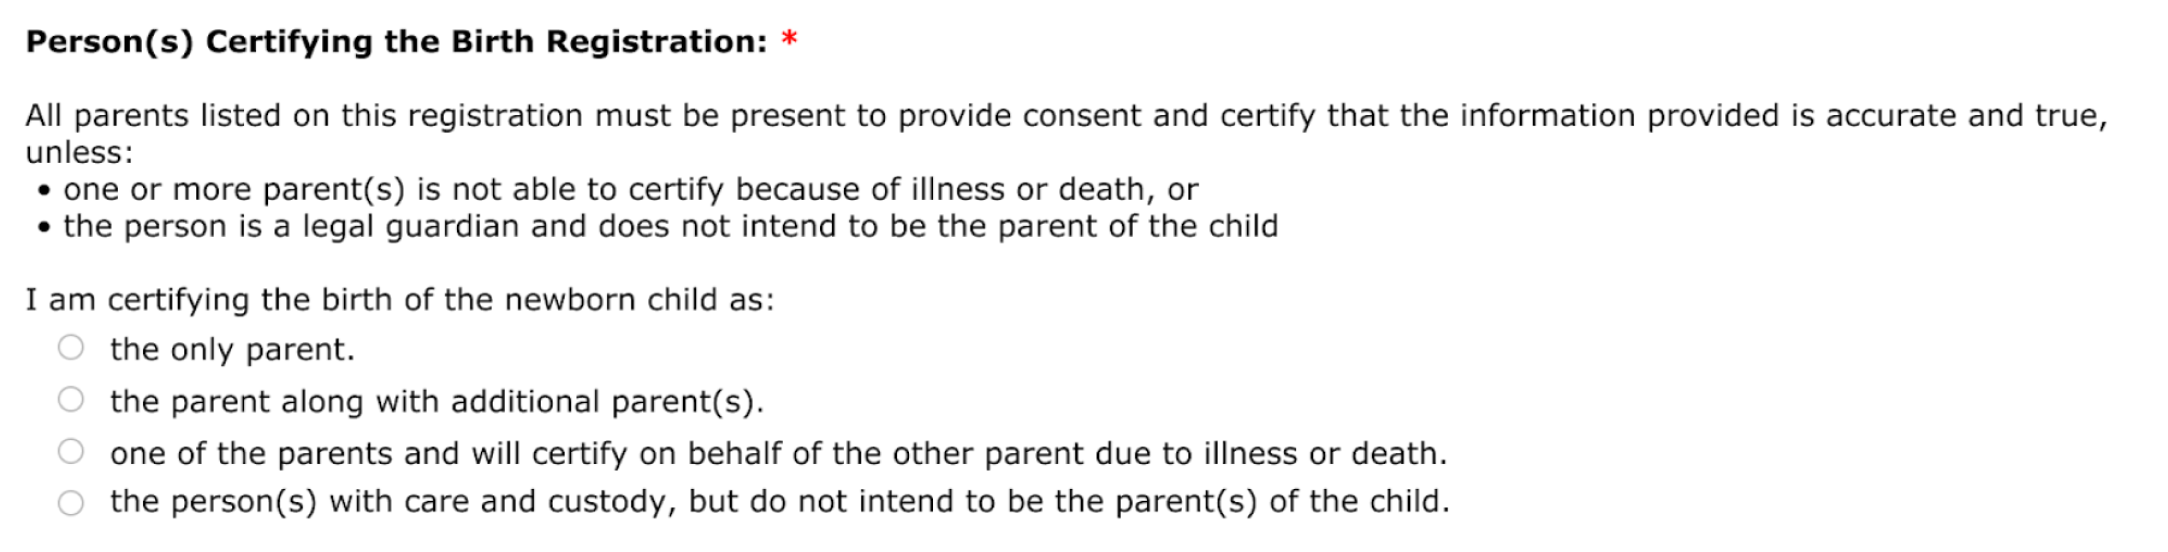 Question for person certifying the birth registration. Selections include: the only parent, the parent along with additional parent(s), one of the parents and will certify on behalf of the other parent due to illness or death, and the person with care and custody, but do not intend to be the parent(s) of the child.